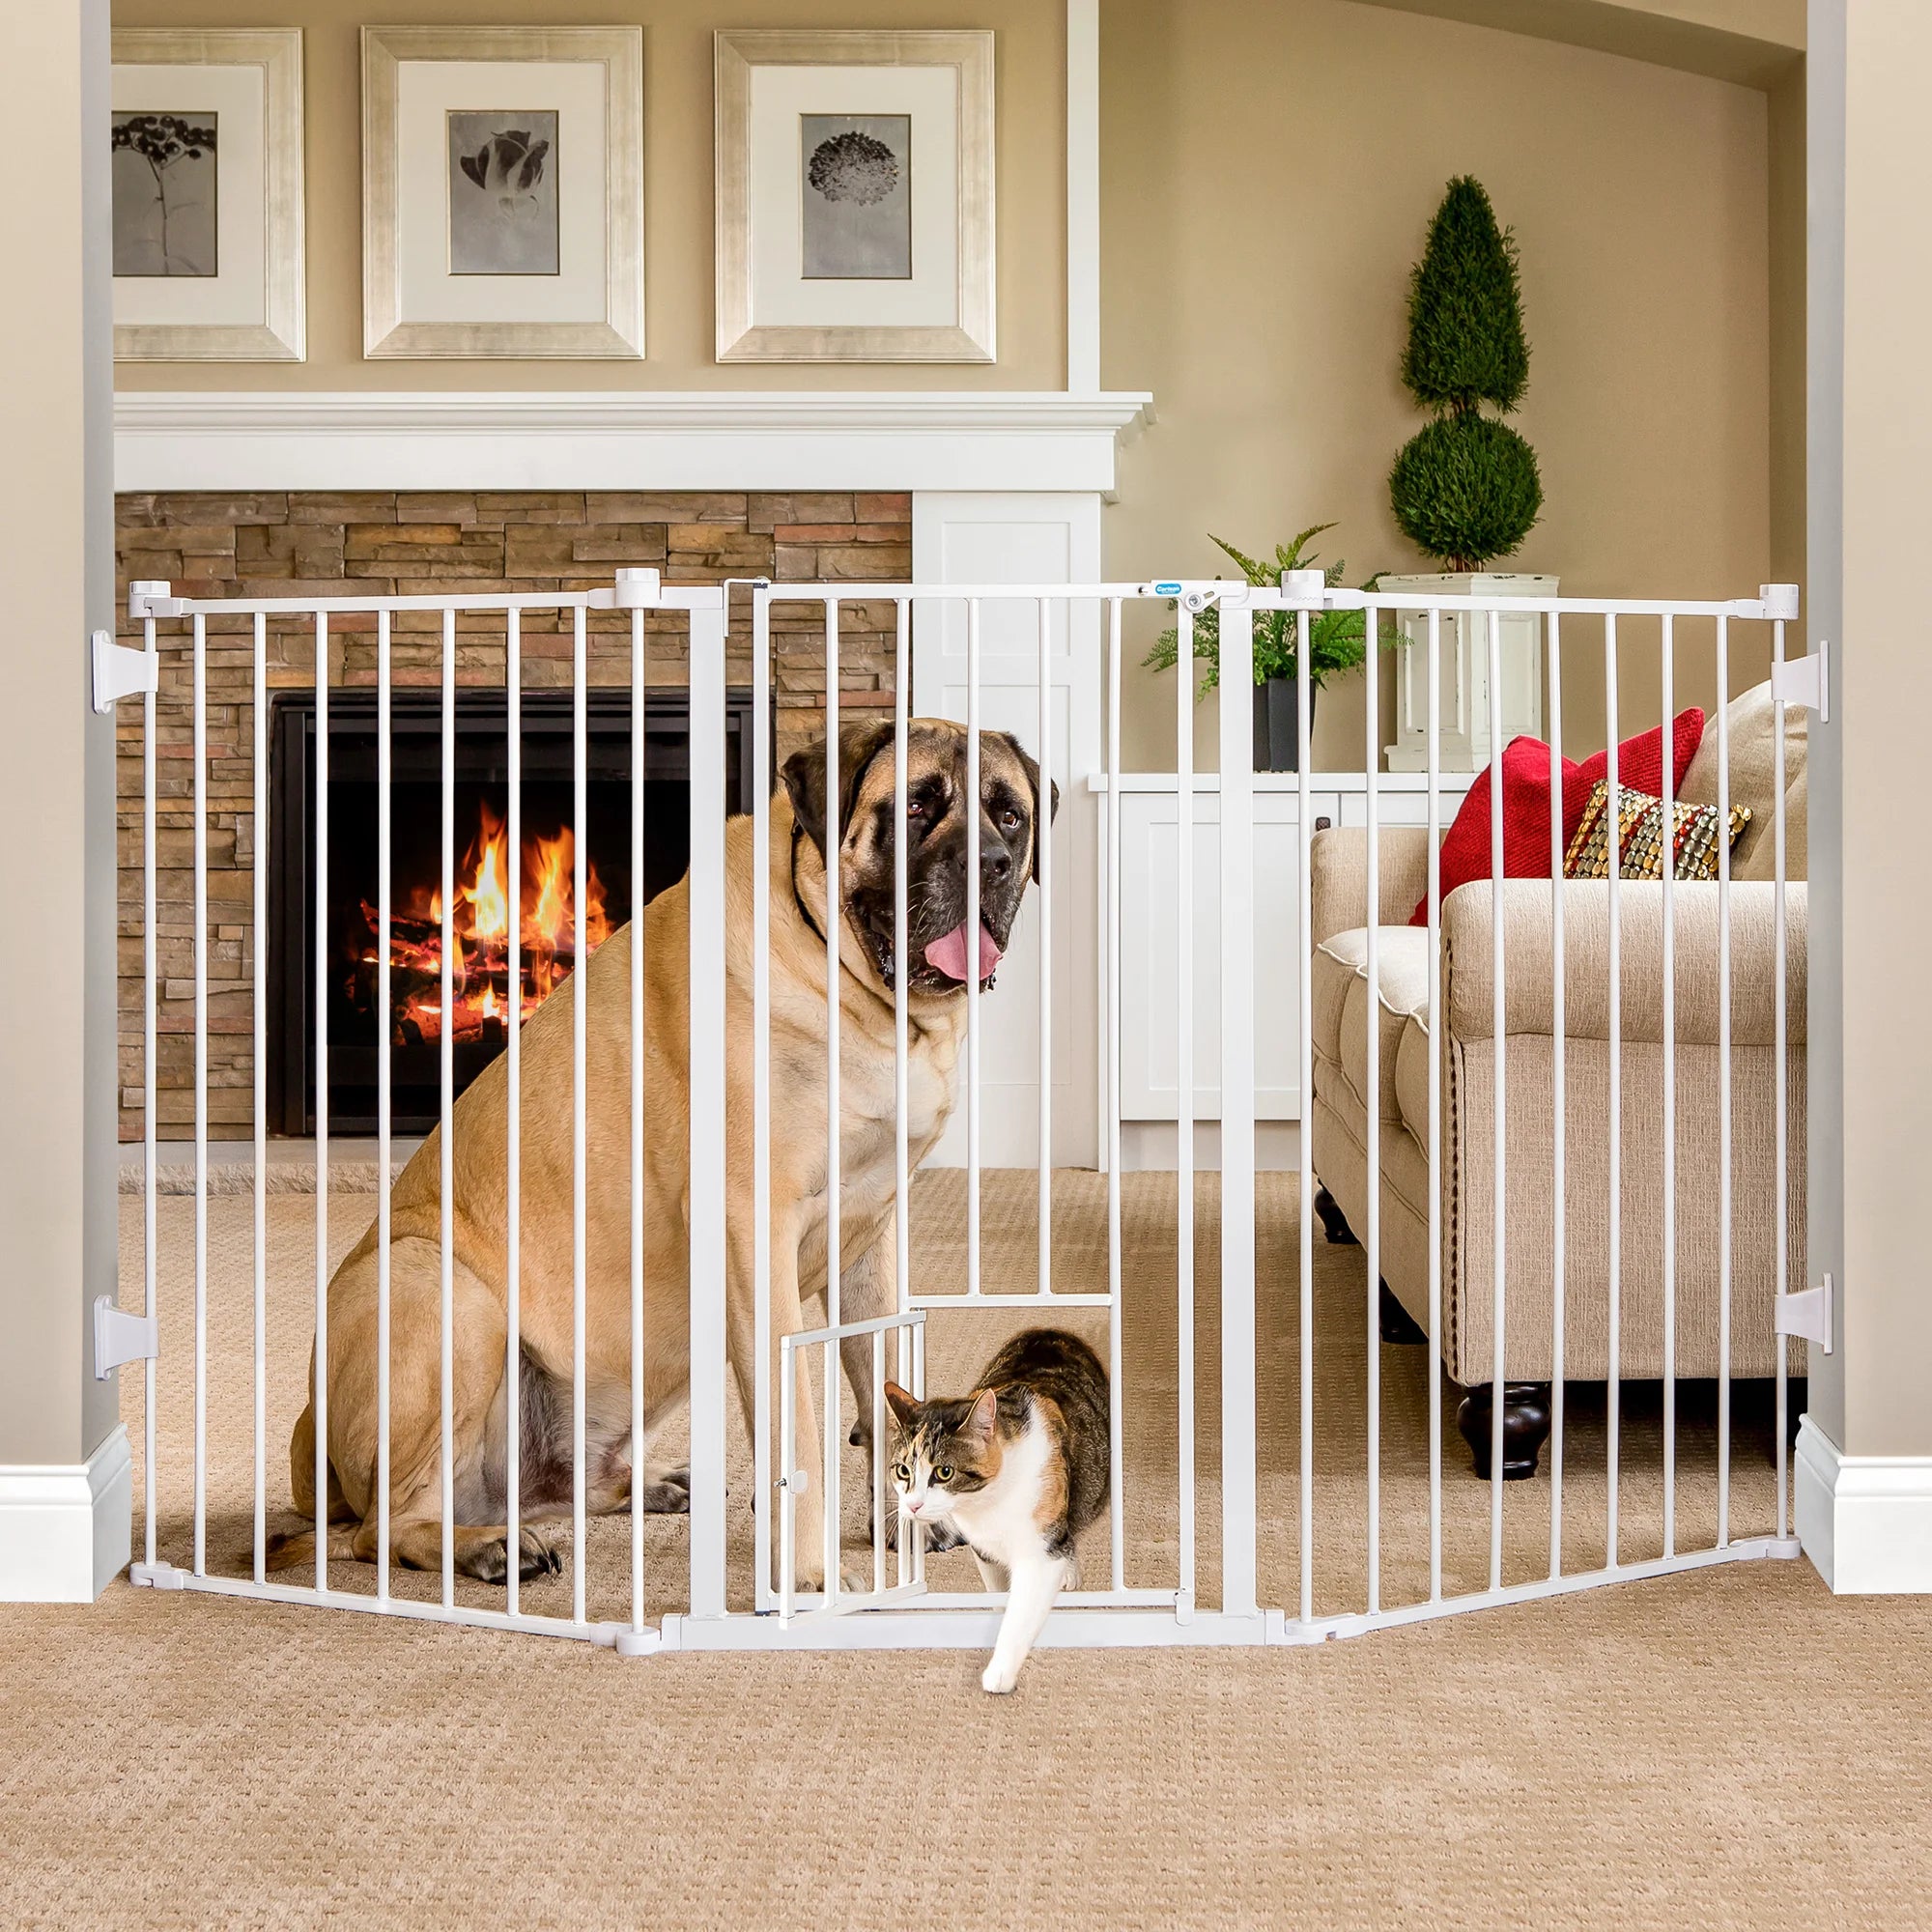 Dog sitting in living room behind Flexi Extra Tall Walk-Thru Pet Gate with cat walking through Small Pet Door.